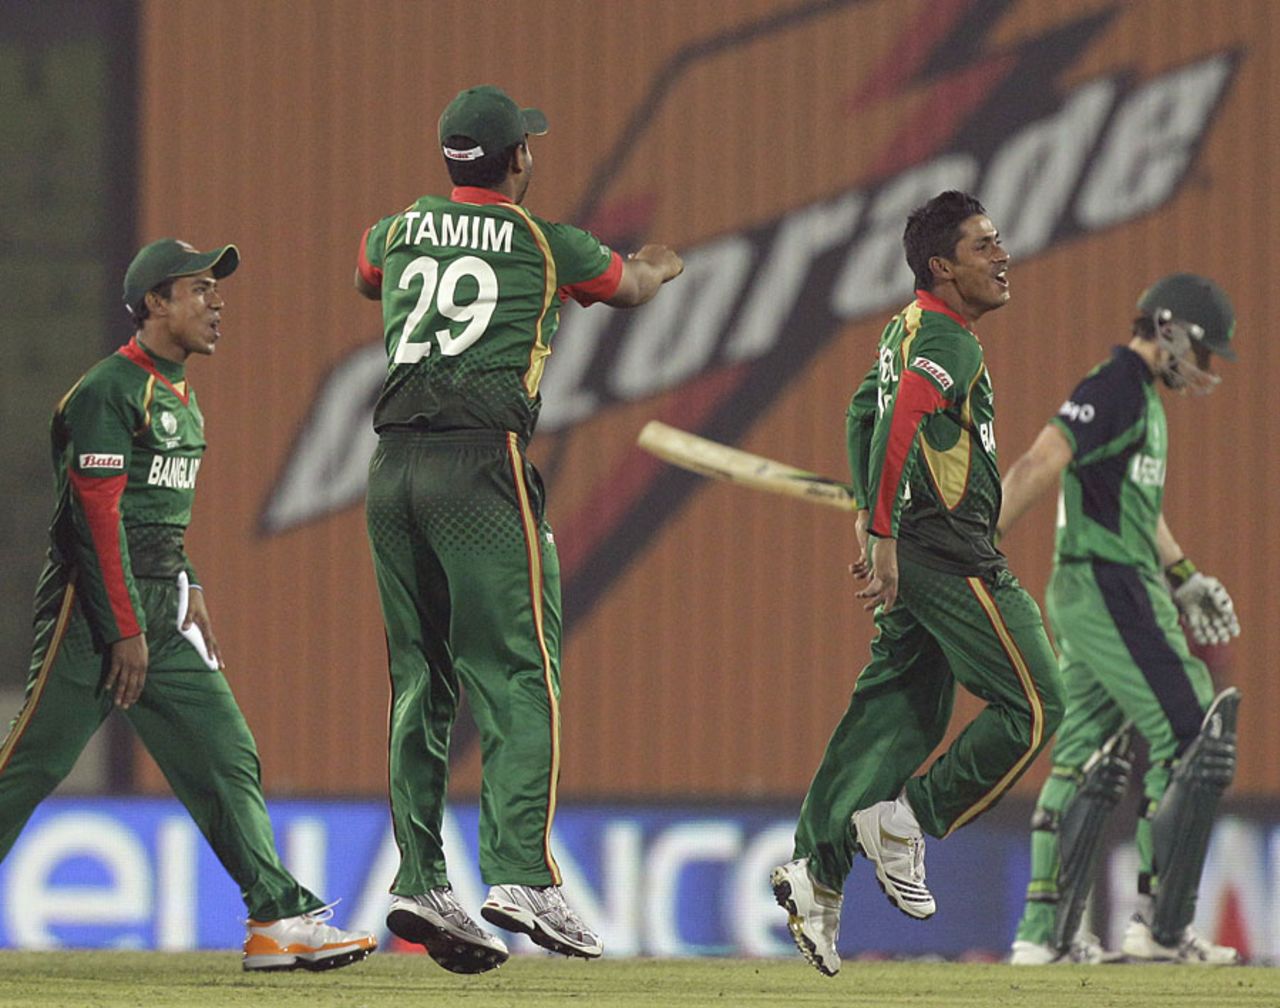 Mohammad Ashraful celebrated wildly after picking up the crucial wicket of Ed Joyce, Bangladesh v Ireland, World Cup 2011, Mirpur, February 25, 2010
